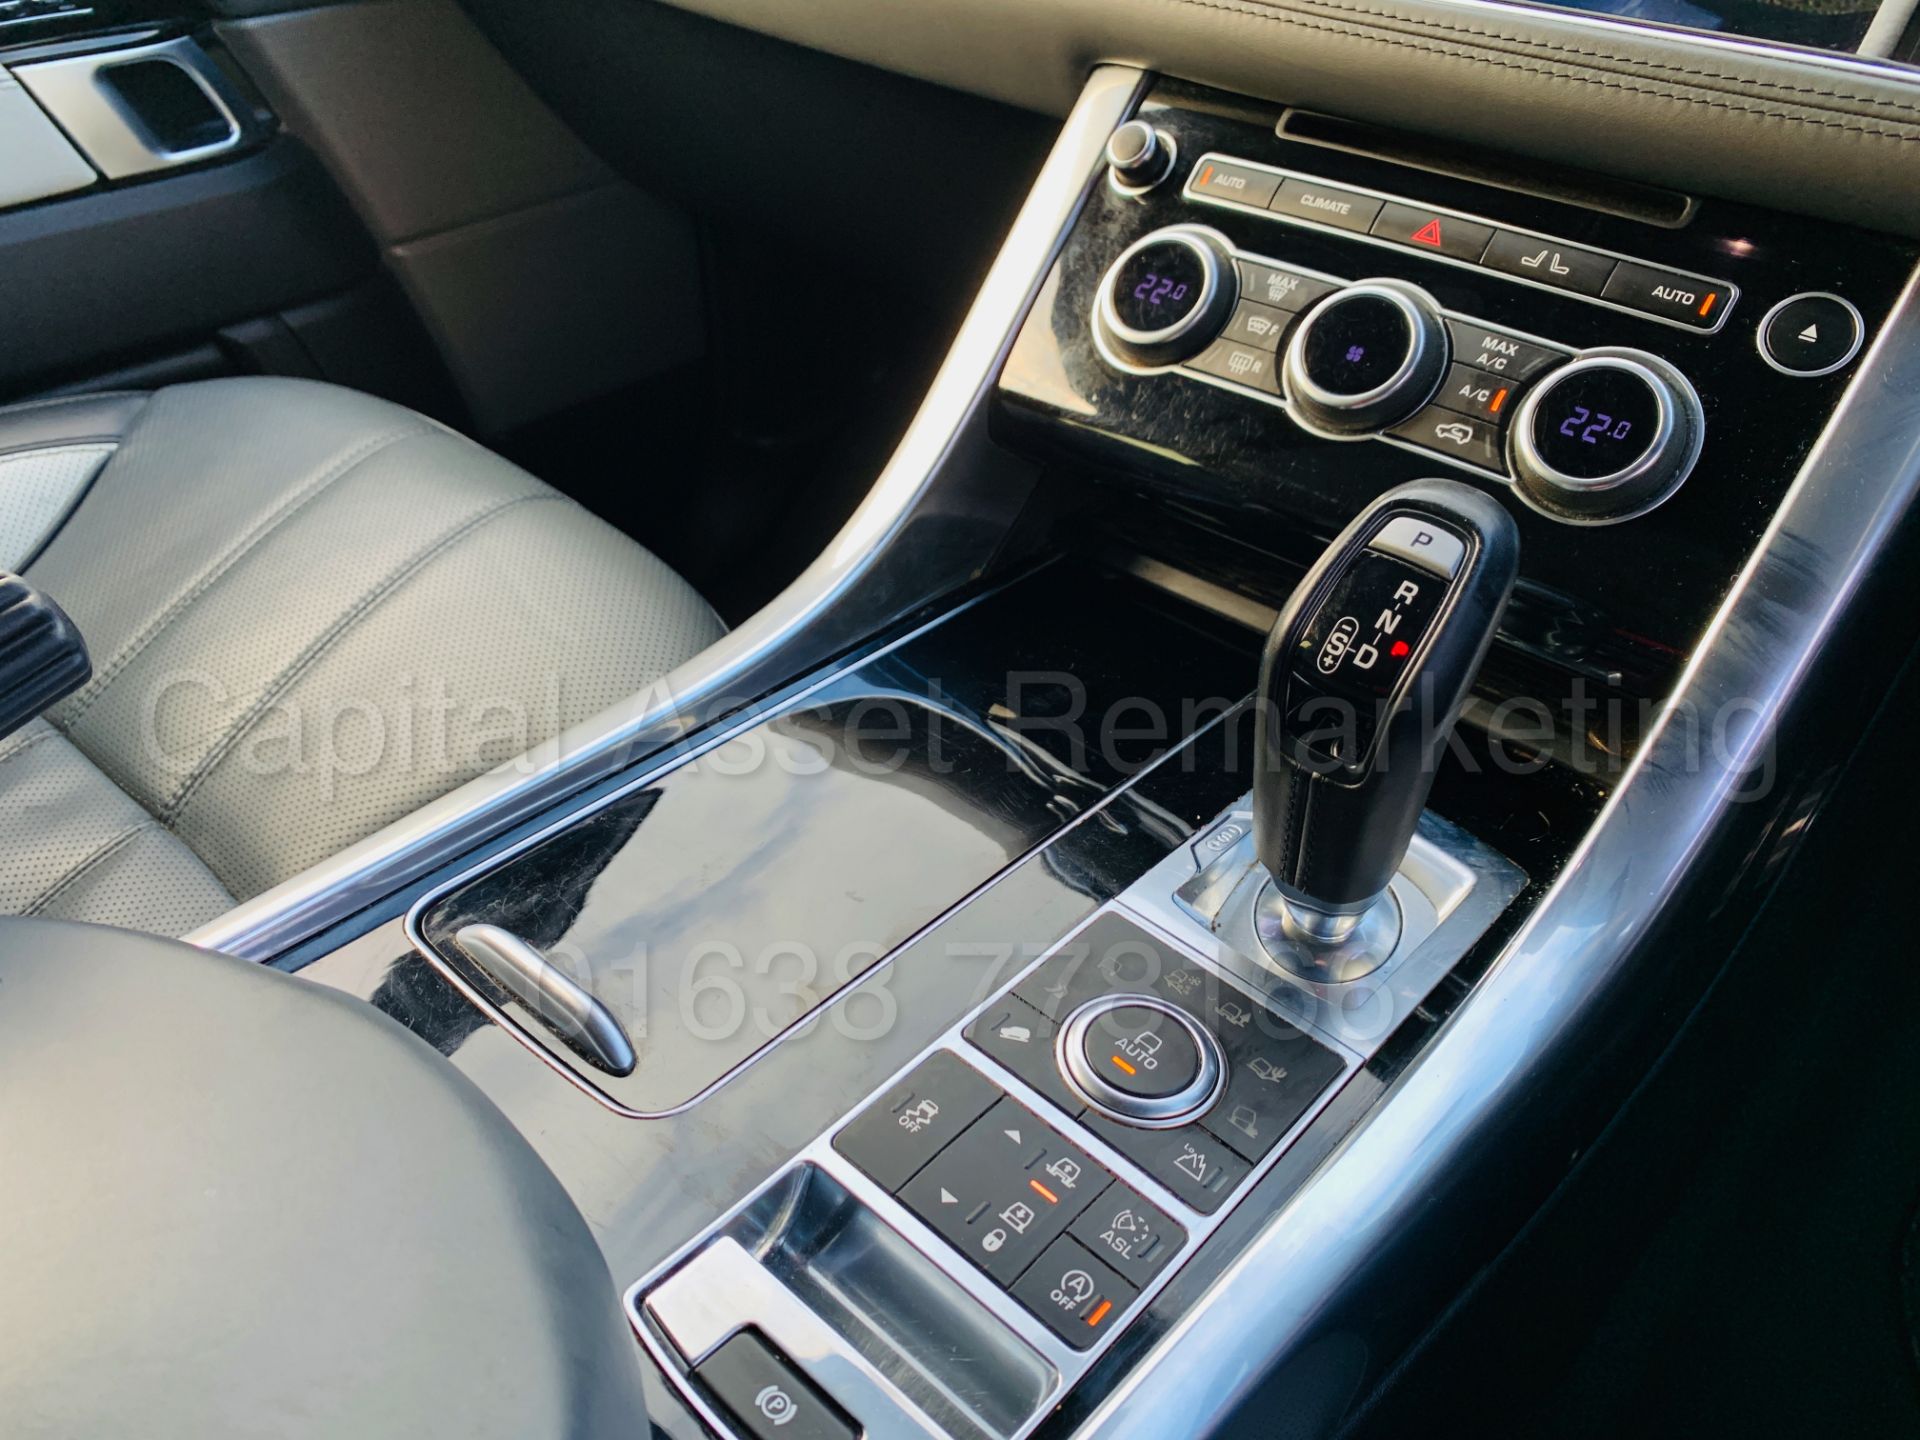 On Sale RANGE ROVER SPORT *AUTOBIOGRAPHY DYNAMIC* (2015 MODEL) '3.0 SDV6 - 8 SPEED AUTO' HIGE SPEC - Image 76 of 85